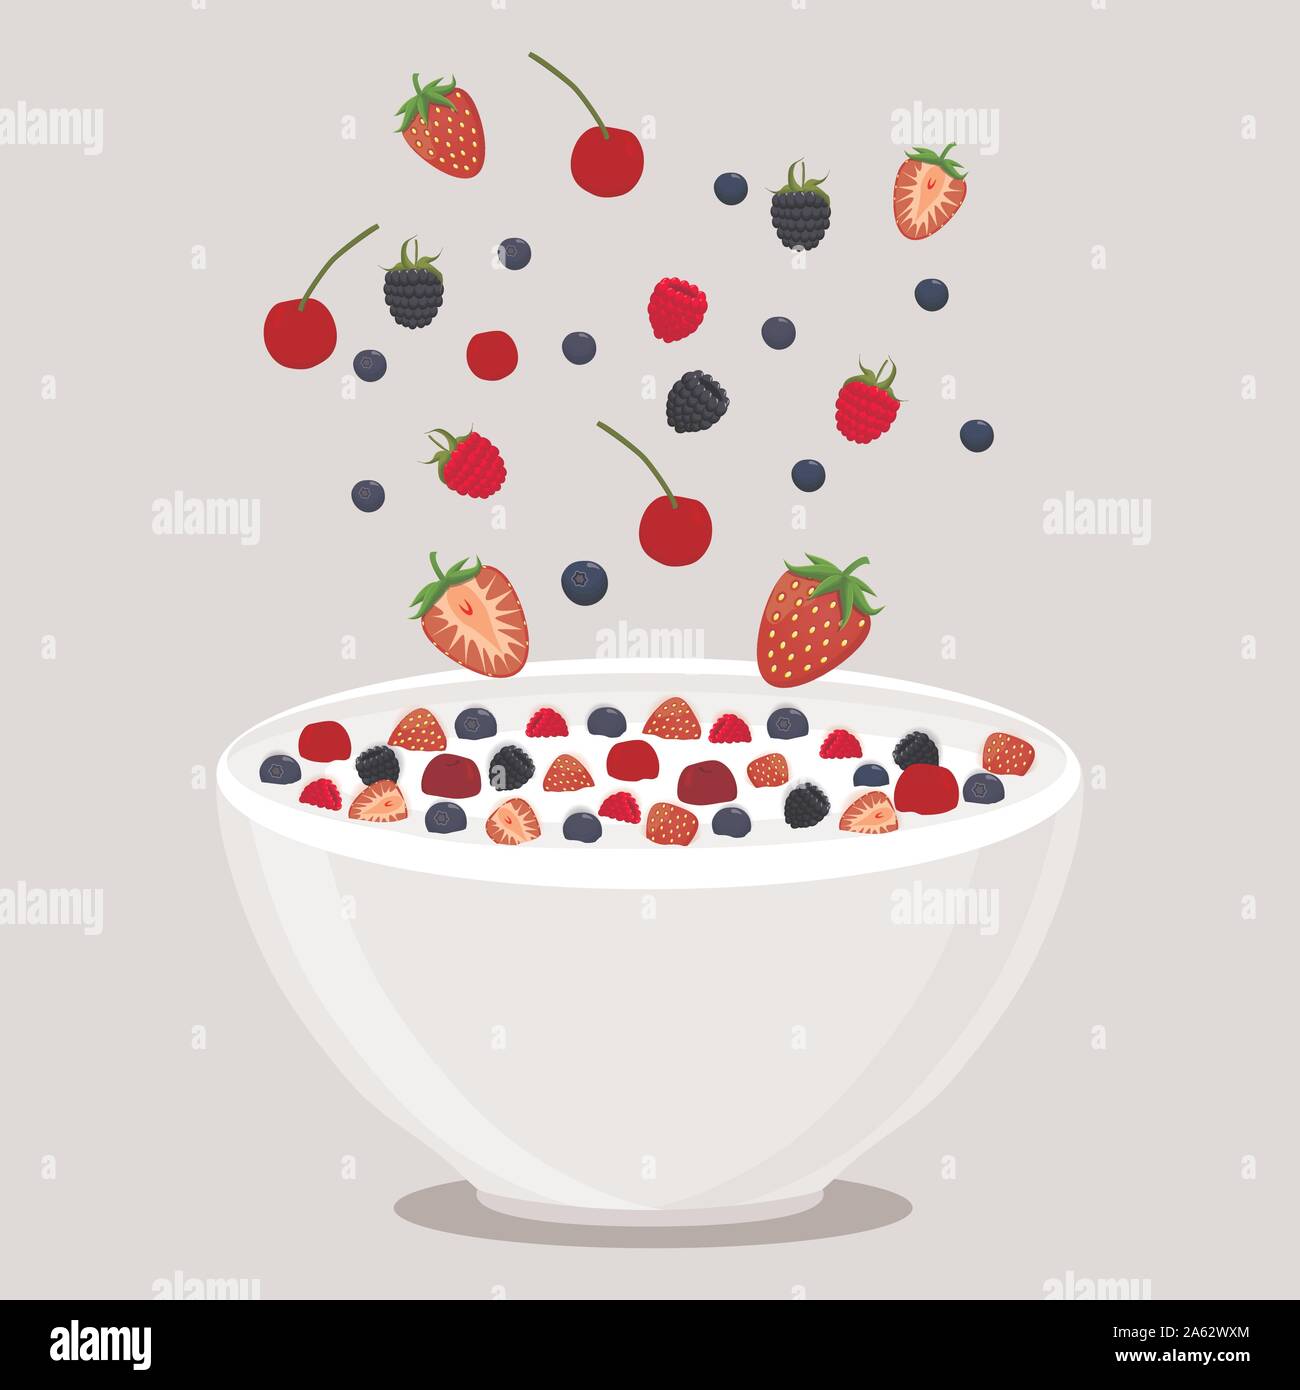 Abstract vector icon illustration logo for berries in bowl, splash of drop white milk. Milk pattern consisting of bowls is filled with berry strawberr Stock Vector